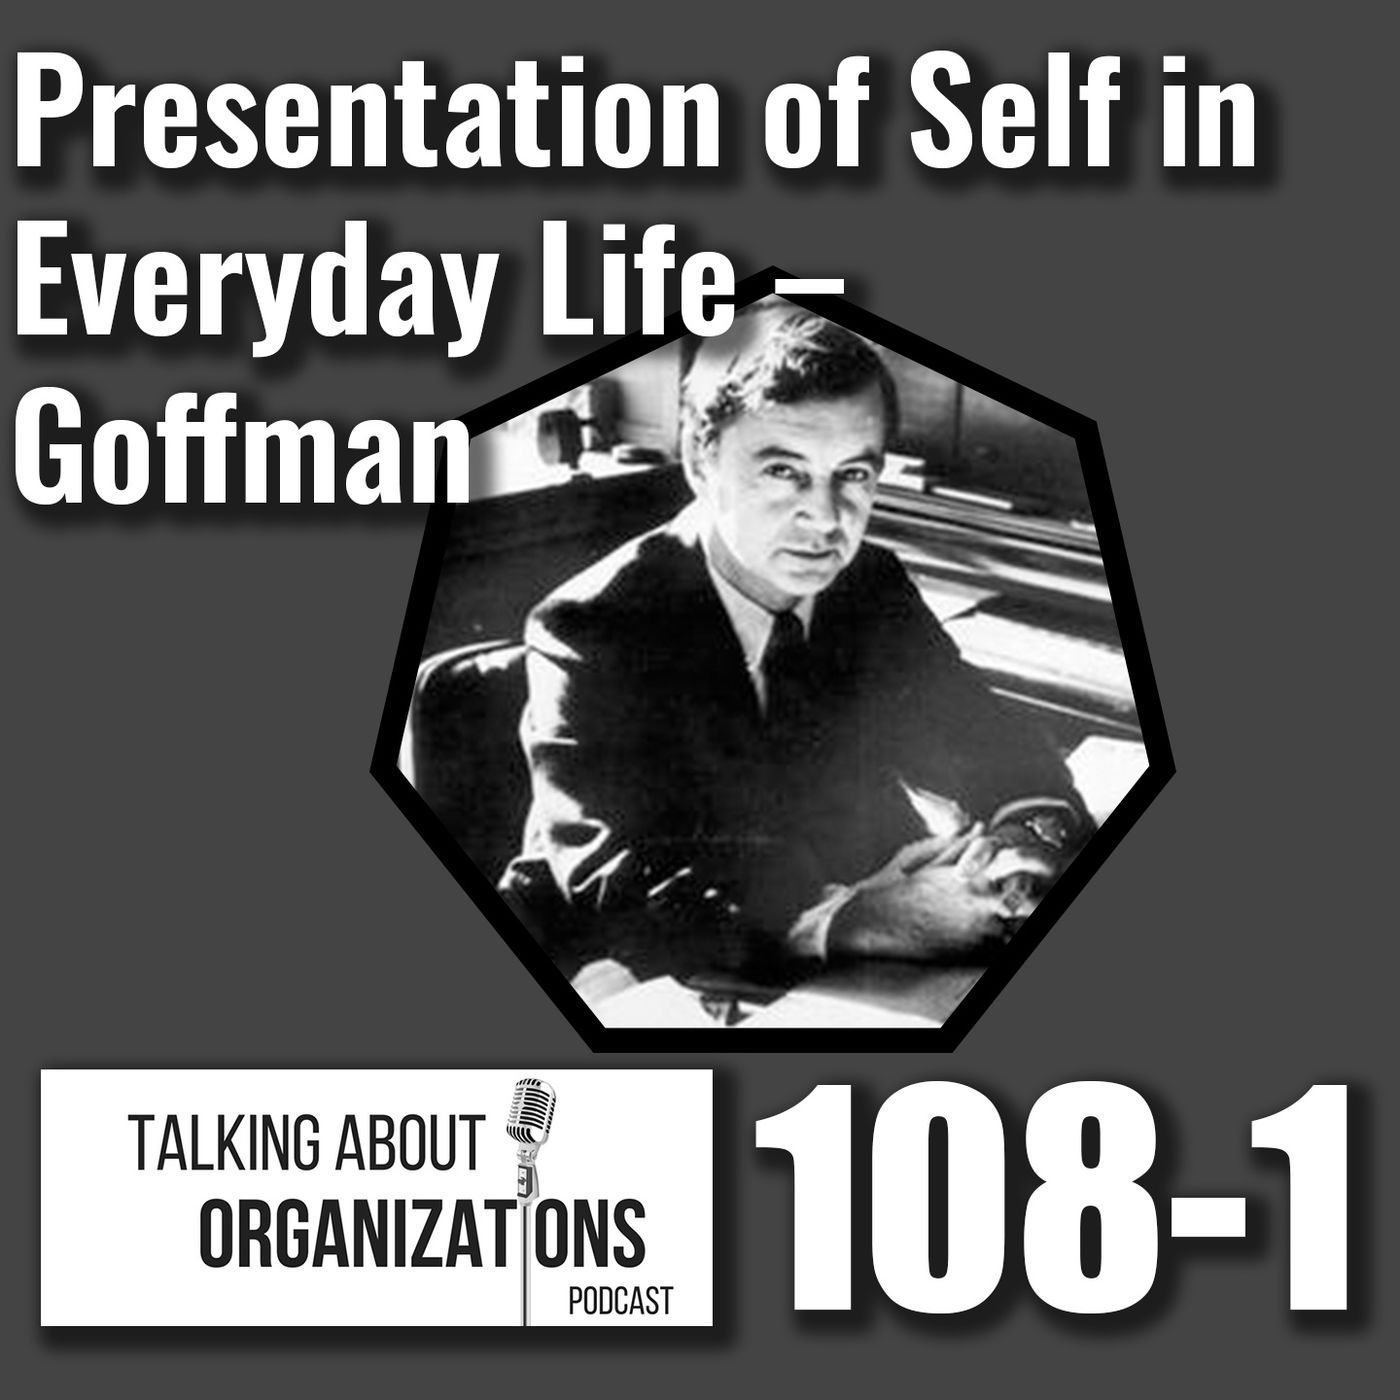 108: Presentation of Self in Everyday Life - Goffman (Part 1)